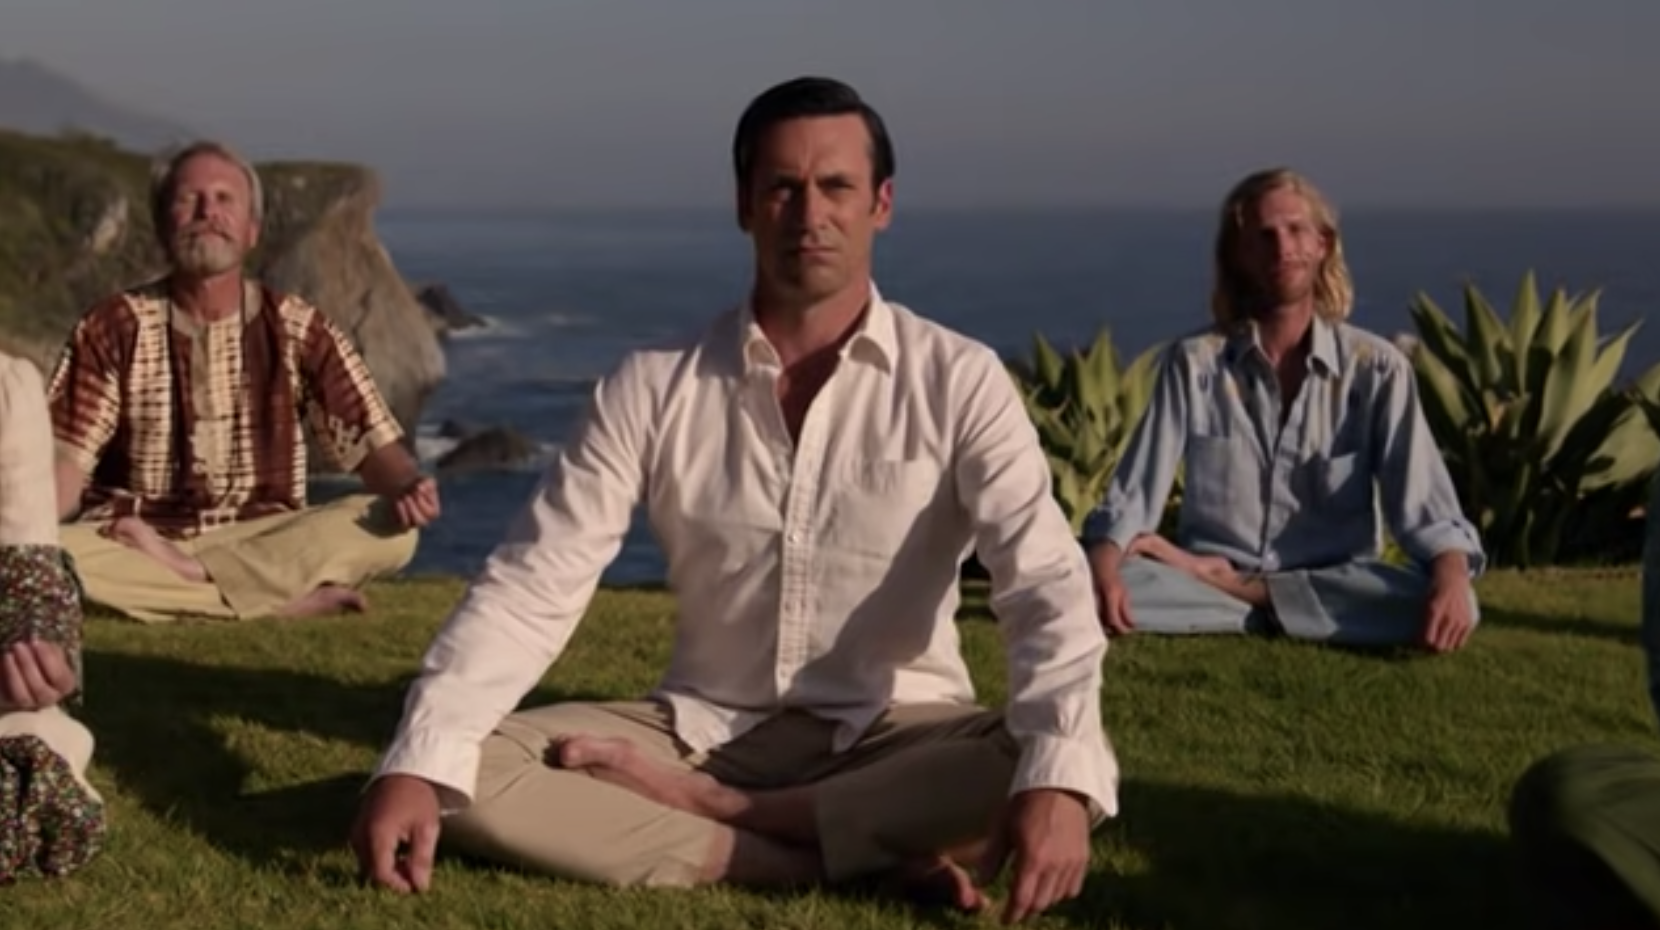 don draper sitting with others for meditation